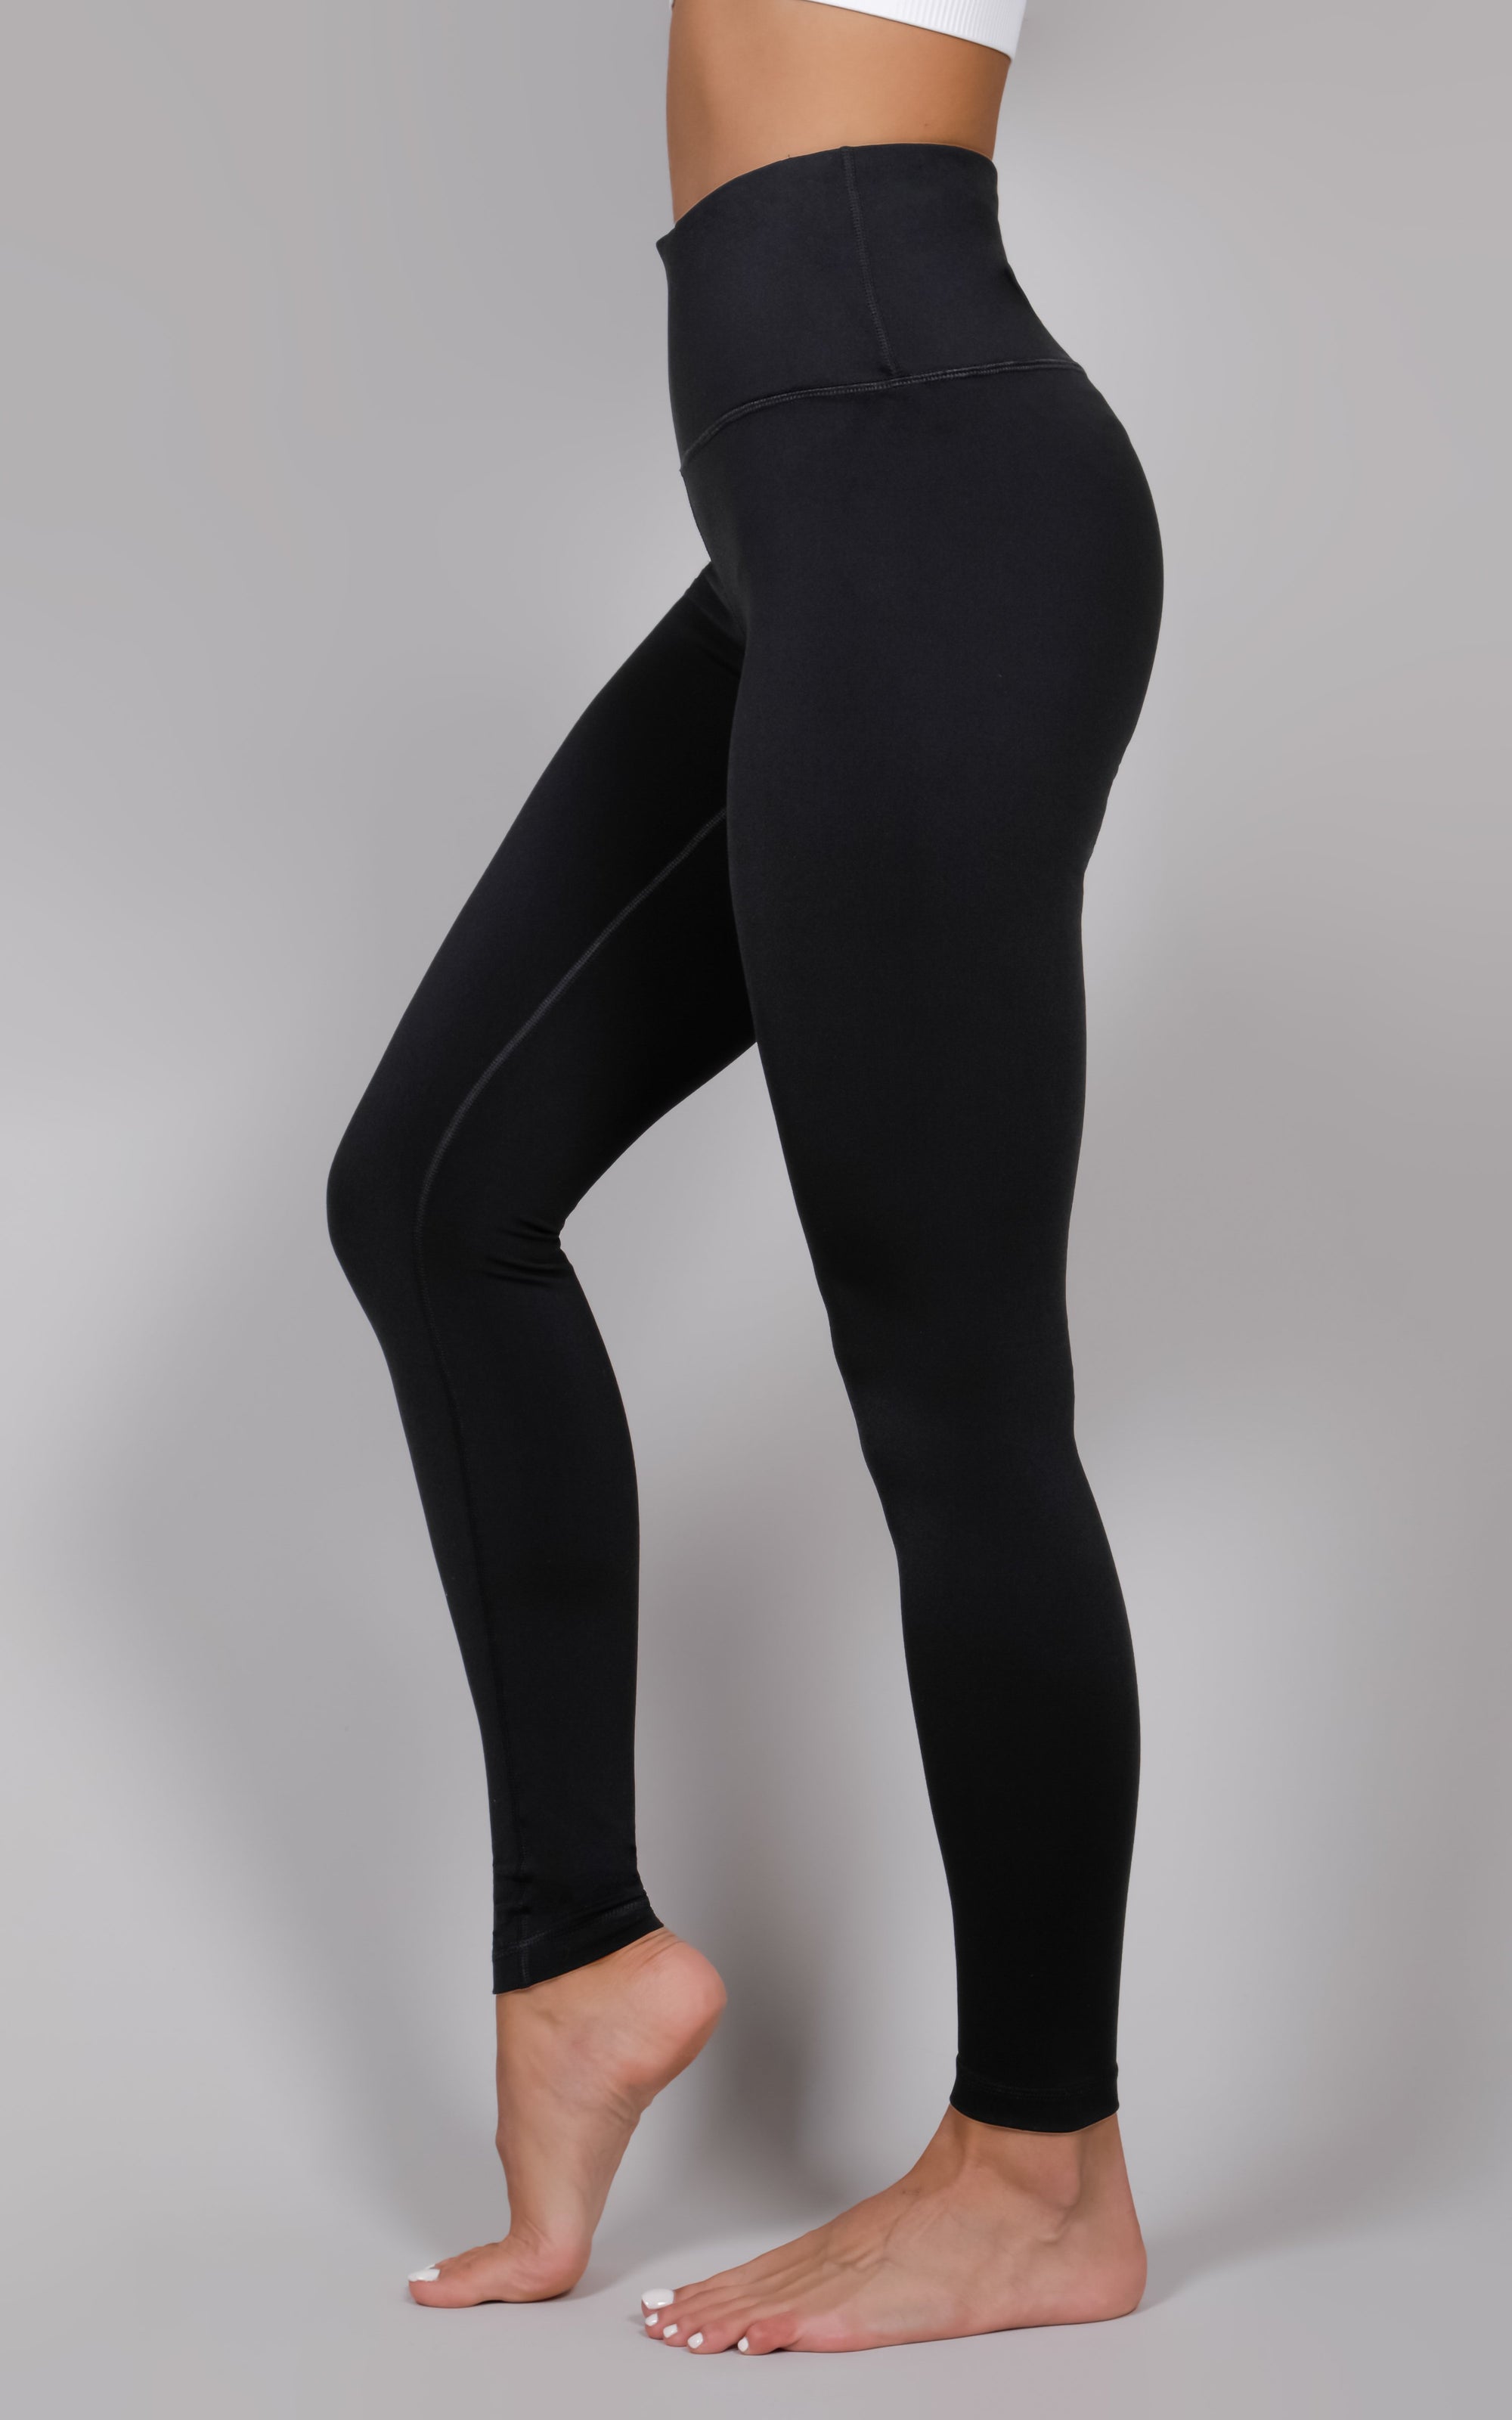 RubberTech-Clothing - Latex leggings with push-up effect Laser Edition